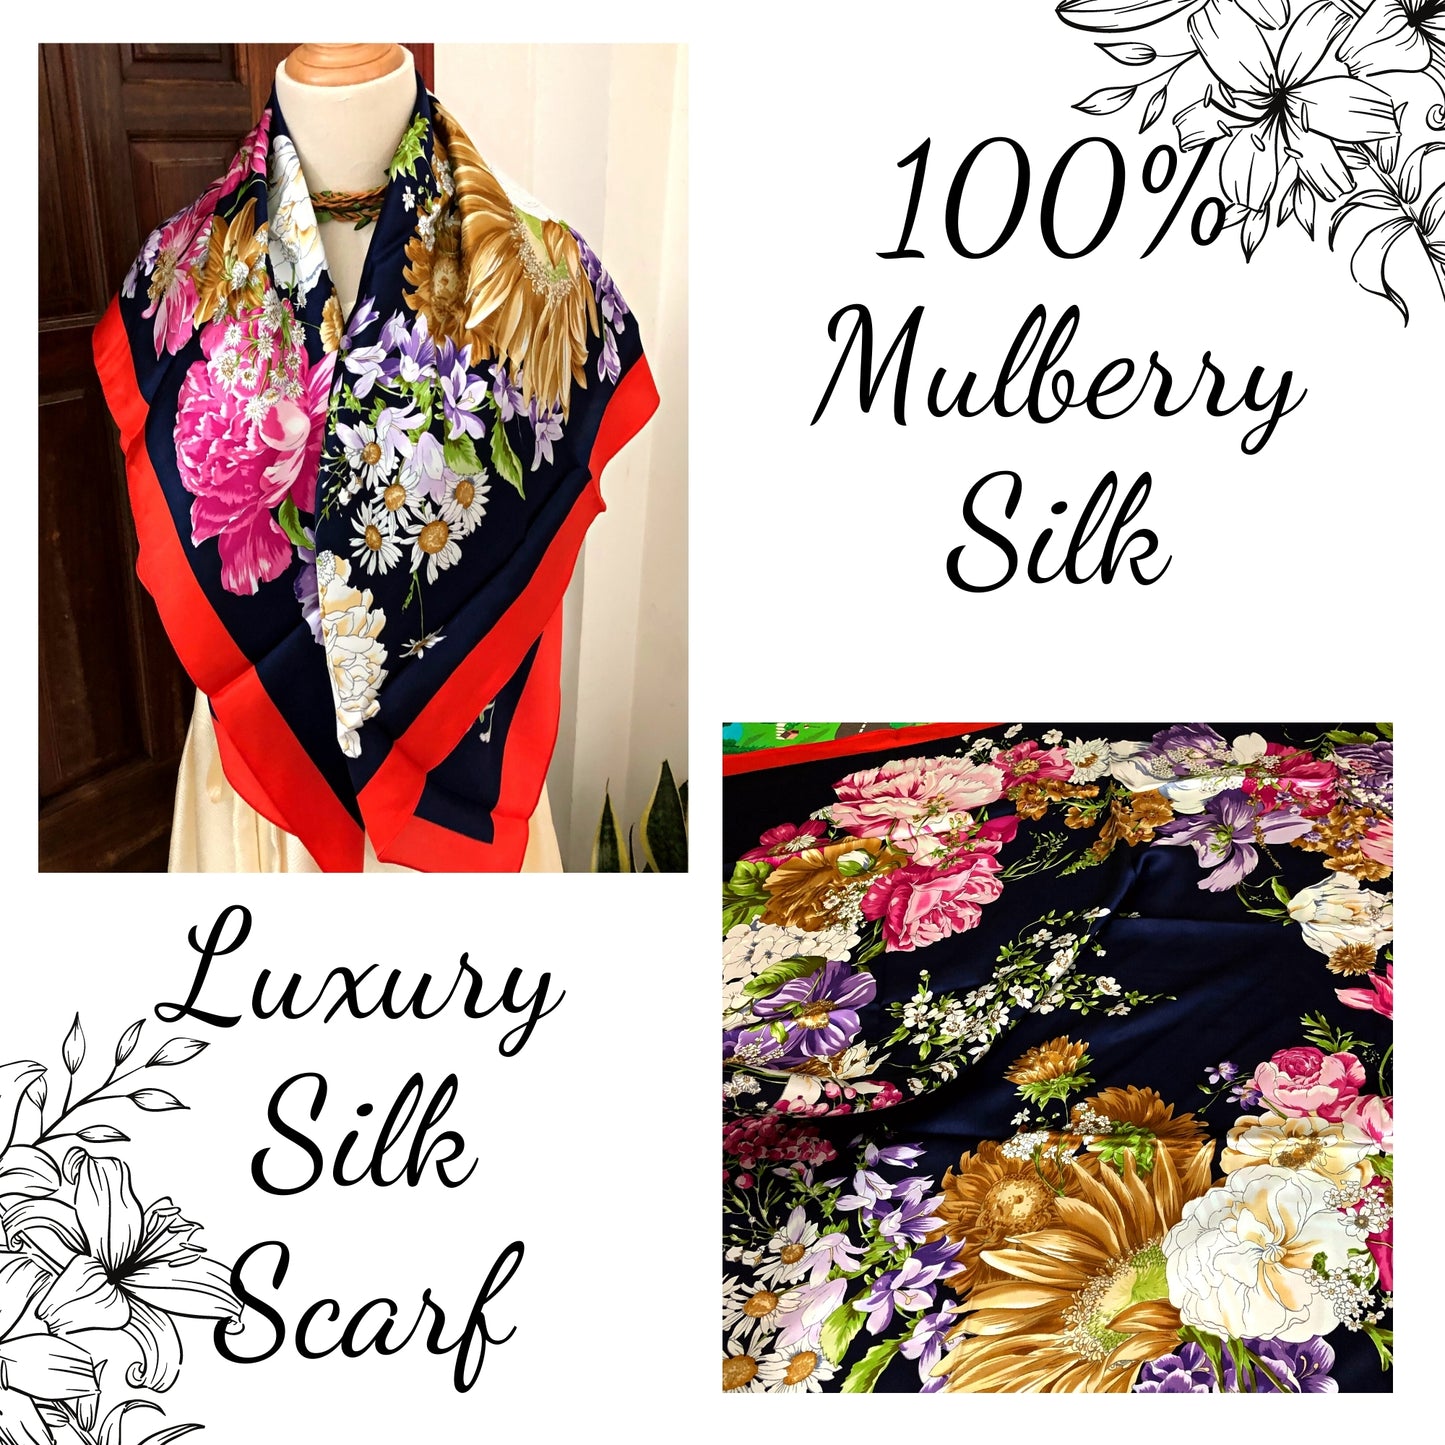 100% MULBERRY SILK SCARF - Luxury Scarf for Women - Smooth and Lightweight Scarves - Gift for women